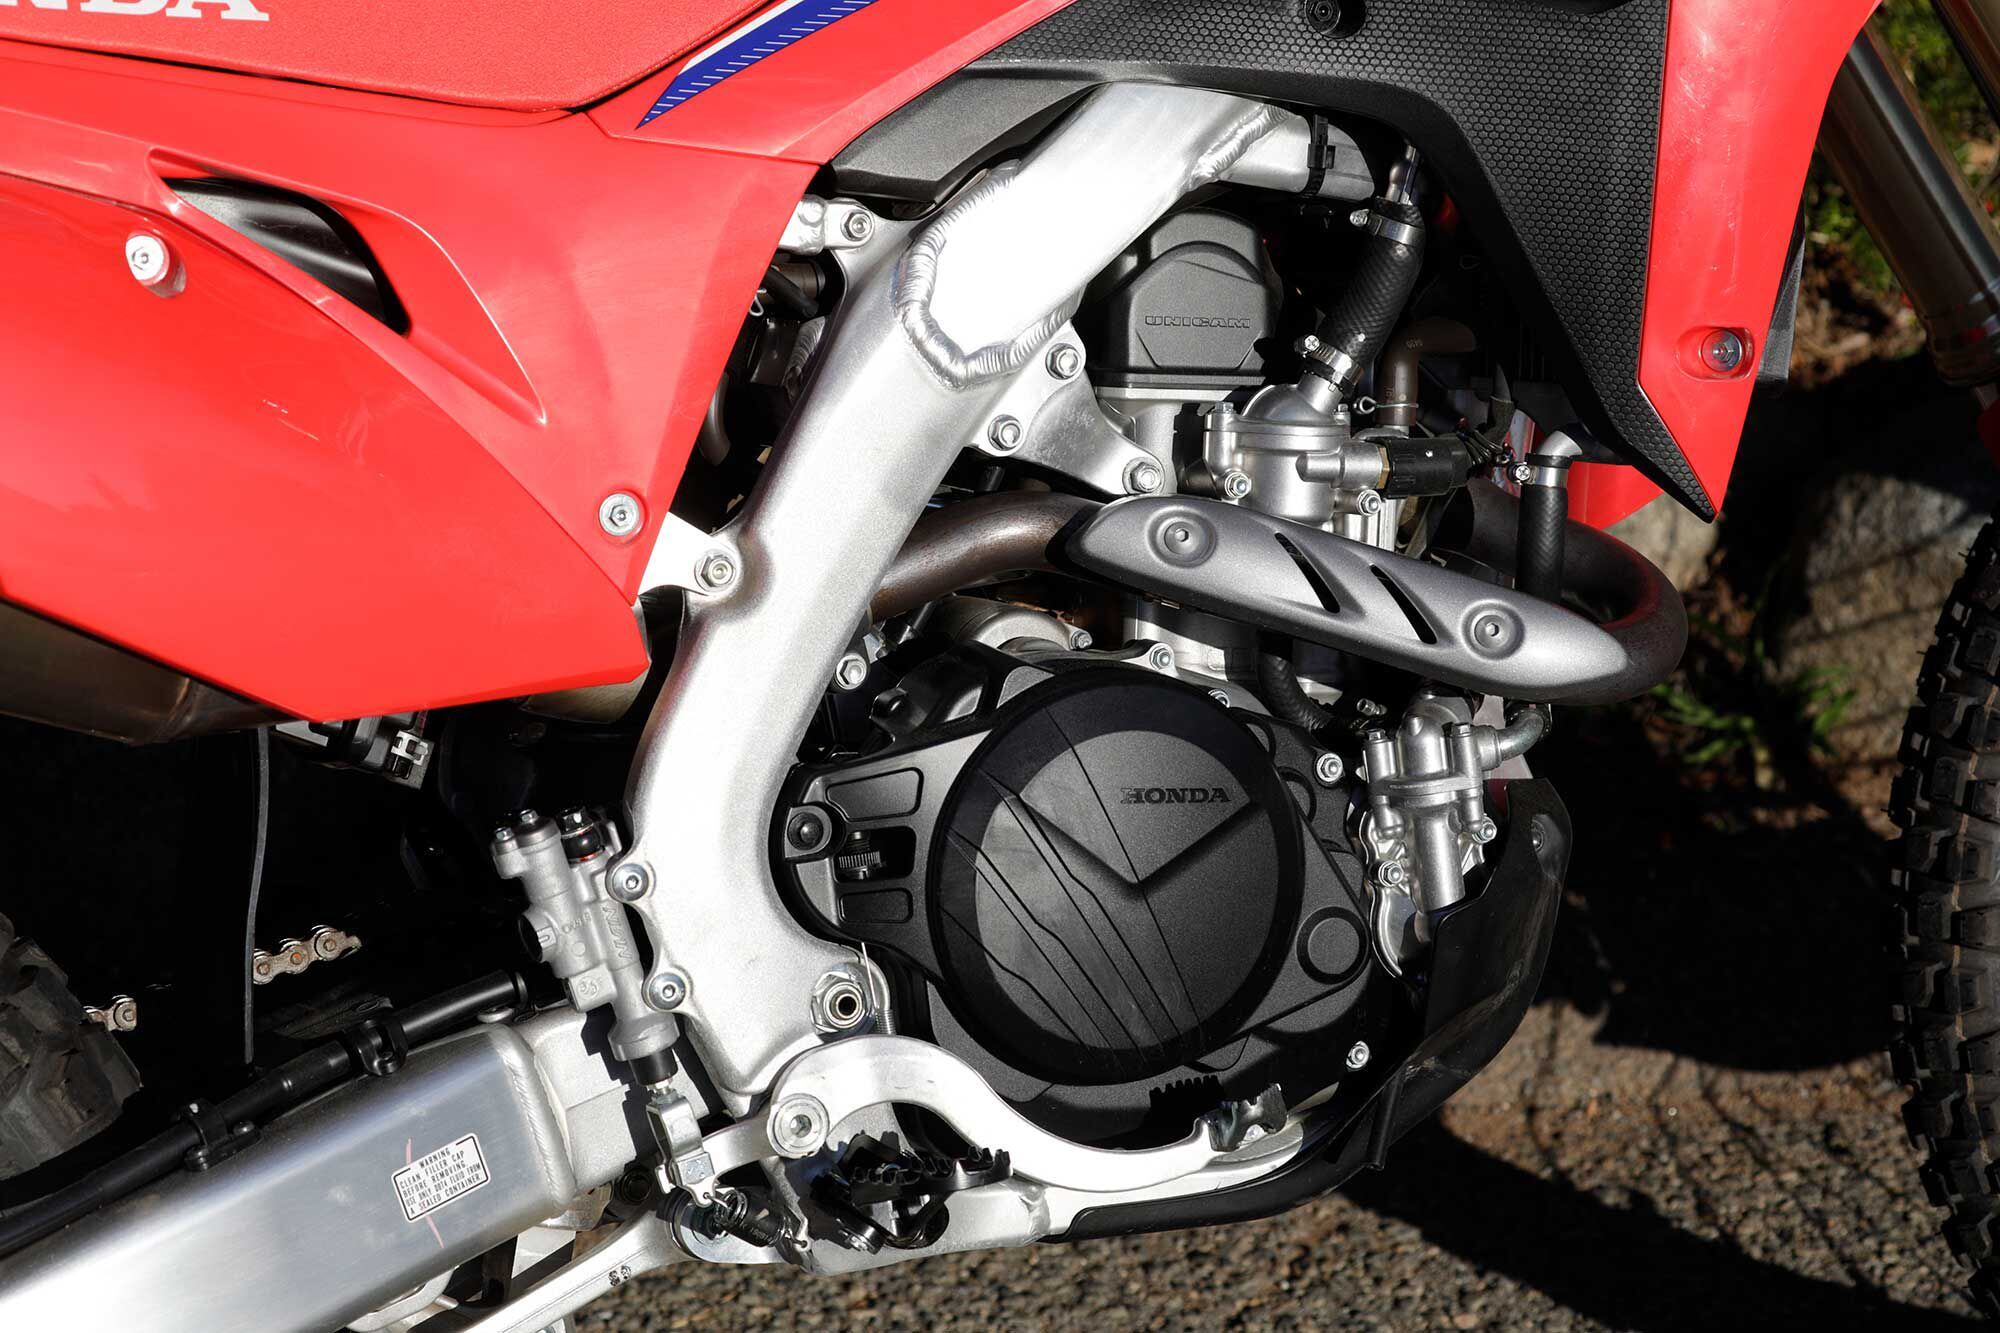 Honda’s legendary 449cc Unicam single powers the CRF450RL. For street use, it benefits from a heavy-duty cooling system and a six-speed transmission.